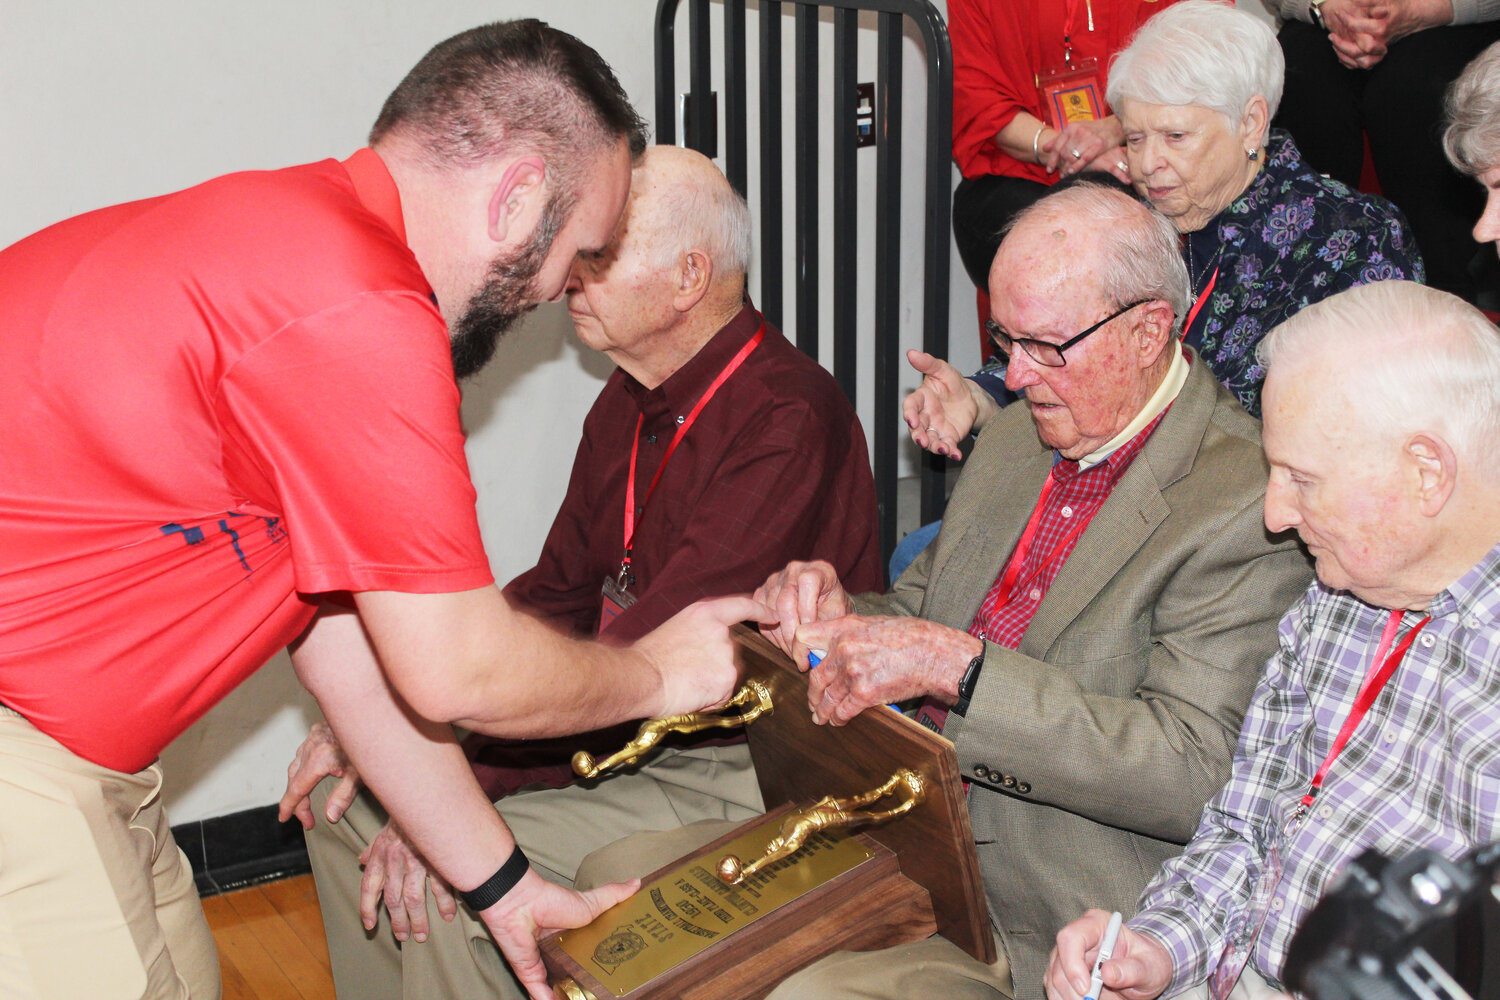 MYSTERY still surrounds the disappearance of Clinton’s 1950 state basketball Championship trophy. A replica was presented during a ceremony to Marvin Rhoads, Bob Shoemaker, Jim Price along with Richard Headrich between basketball games on Friday.